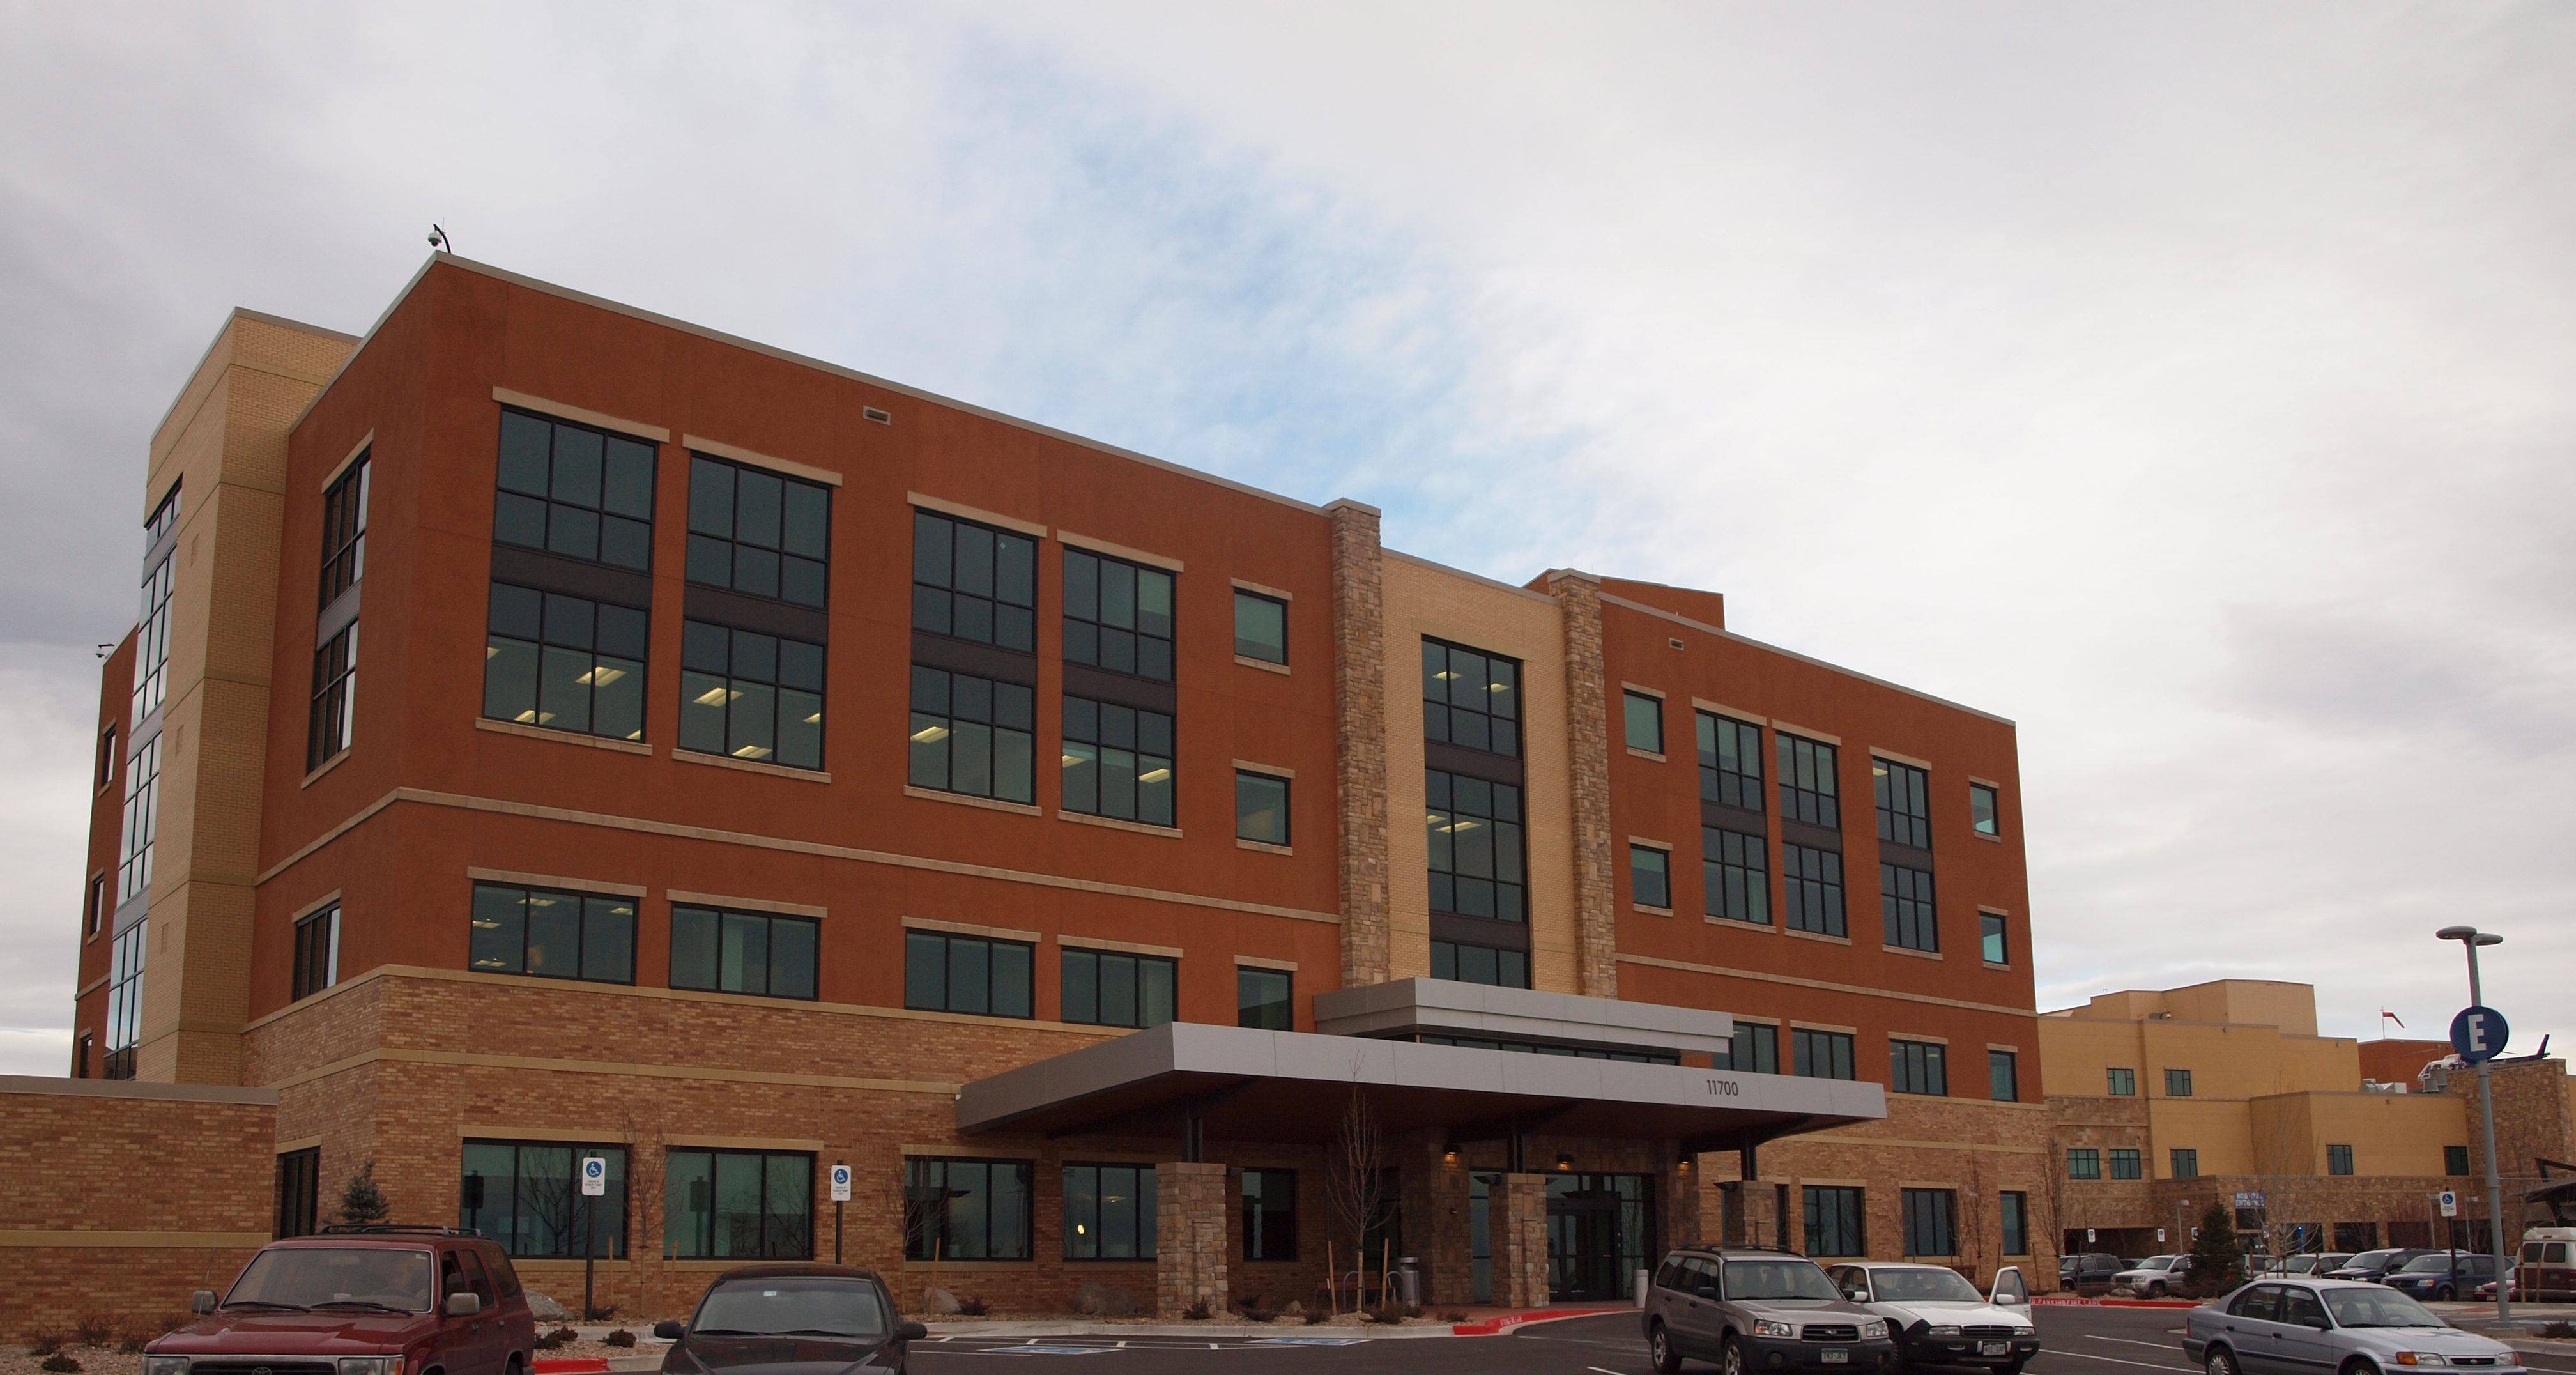 Medical Office Building #2 at the St. Anthony's Medical Campus in Lakewood, Colo